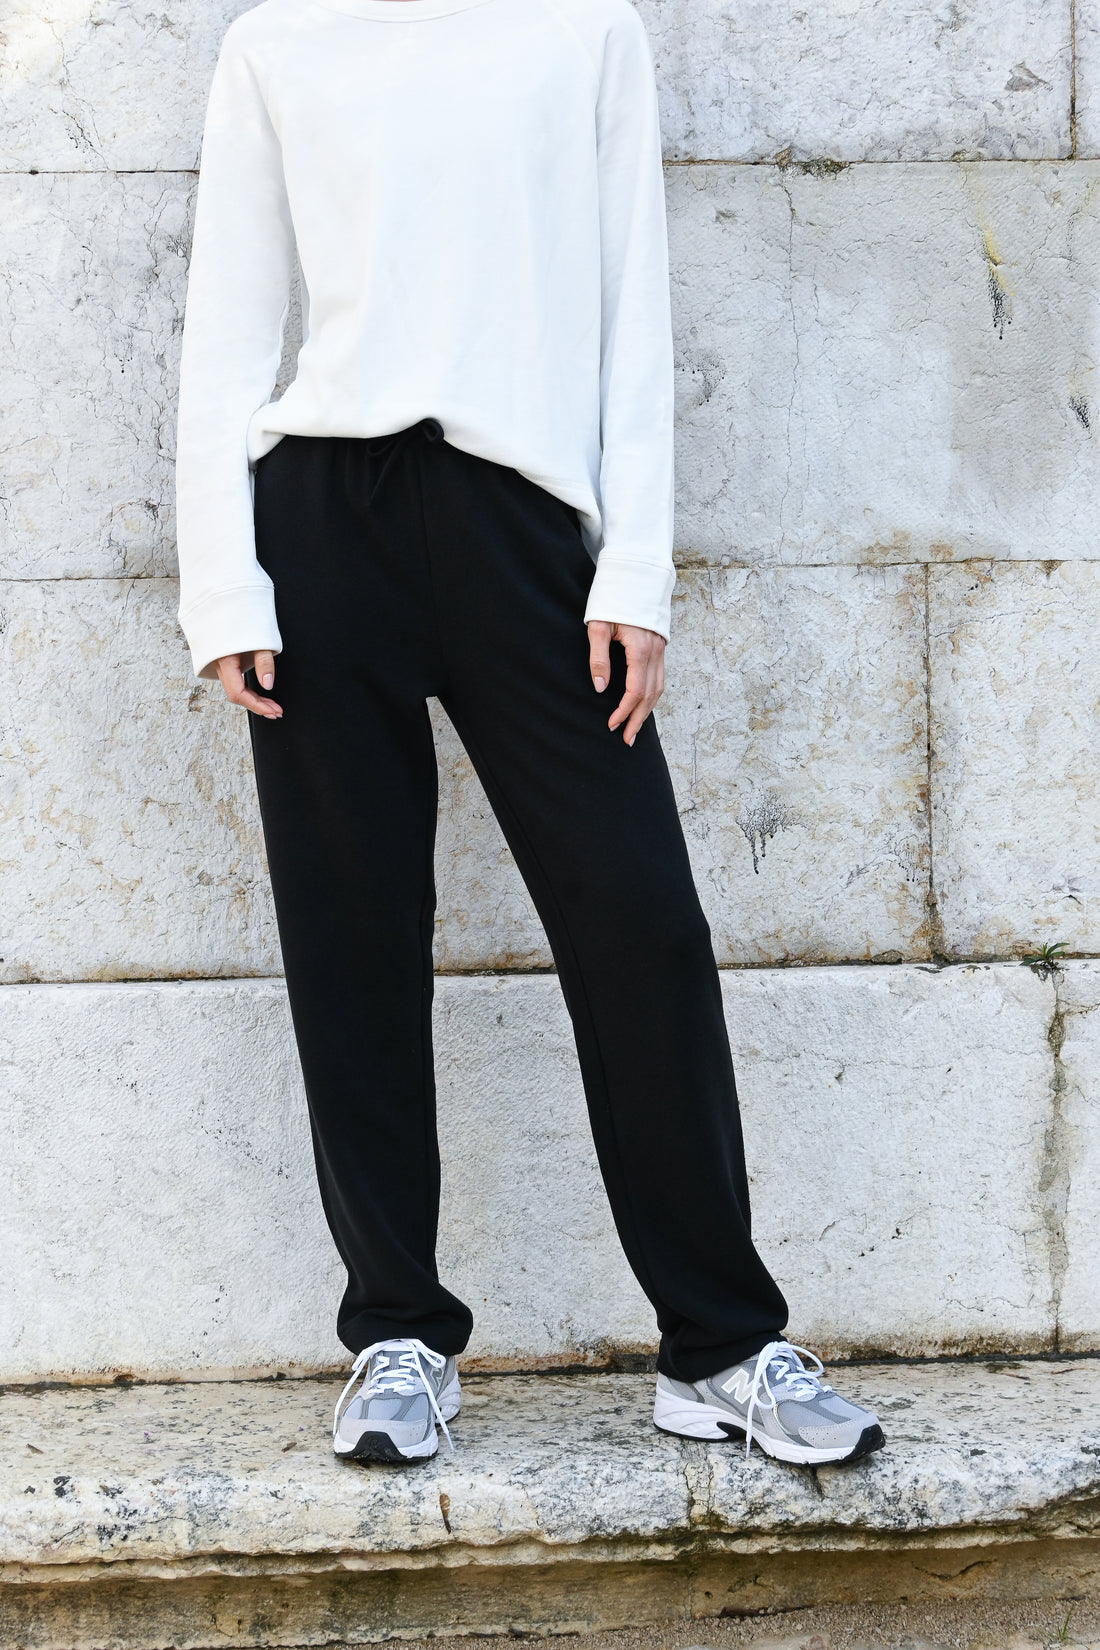 Aspen Trousers in Recycled Cotton, TENCEL™ Lyocell, TENCEL™ Recycled Lyocell and Recycled Linen in Black